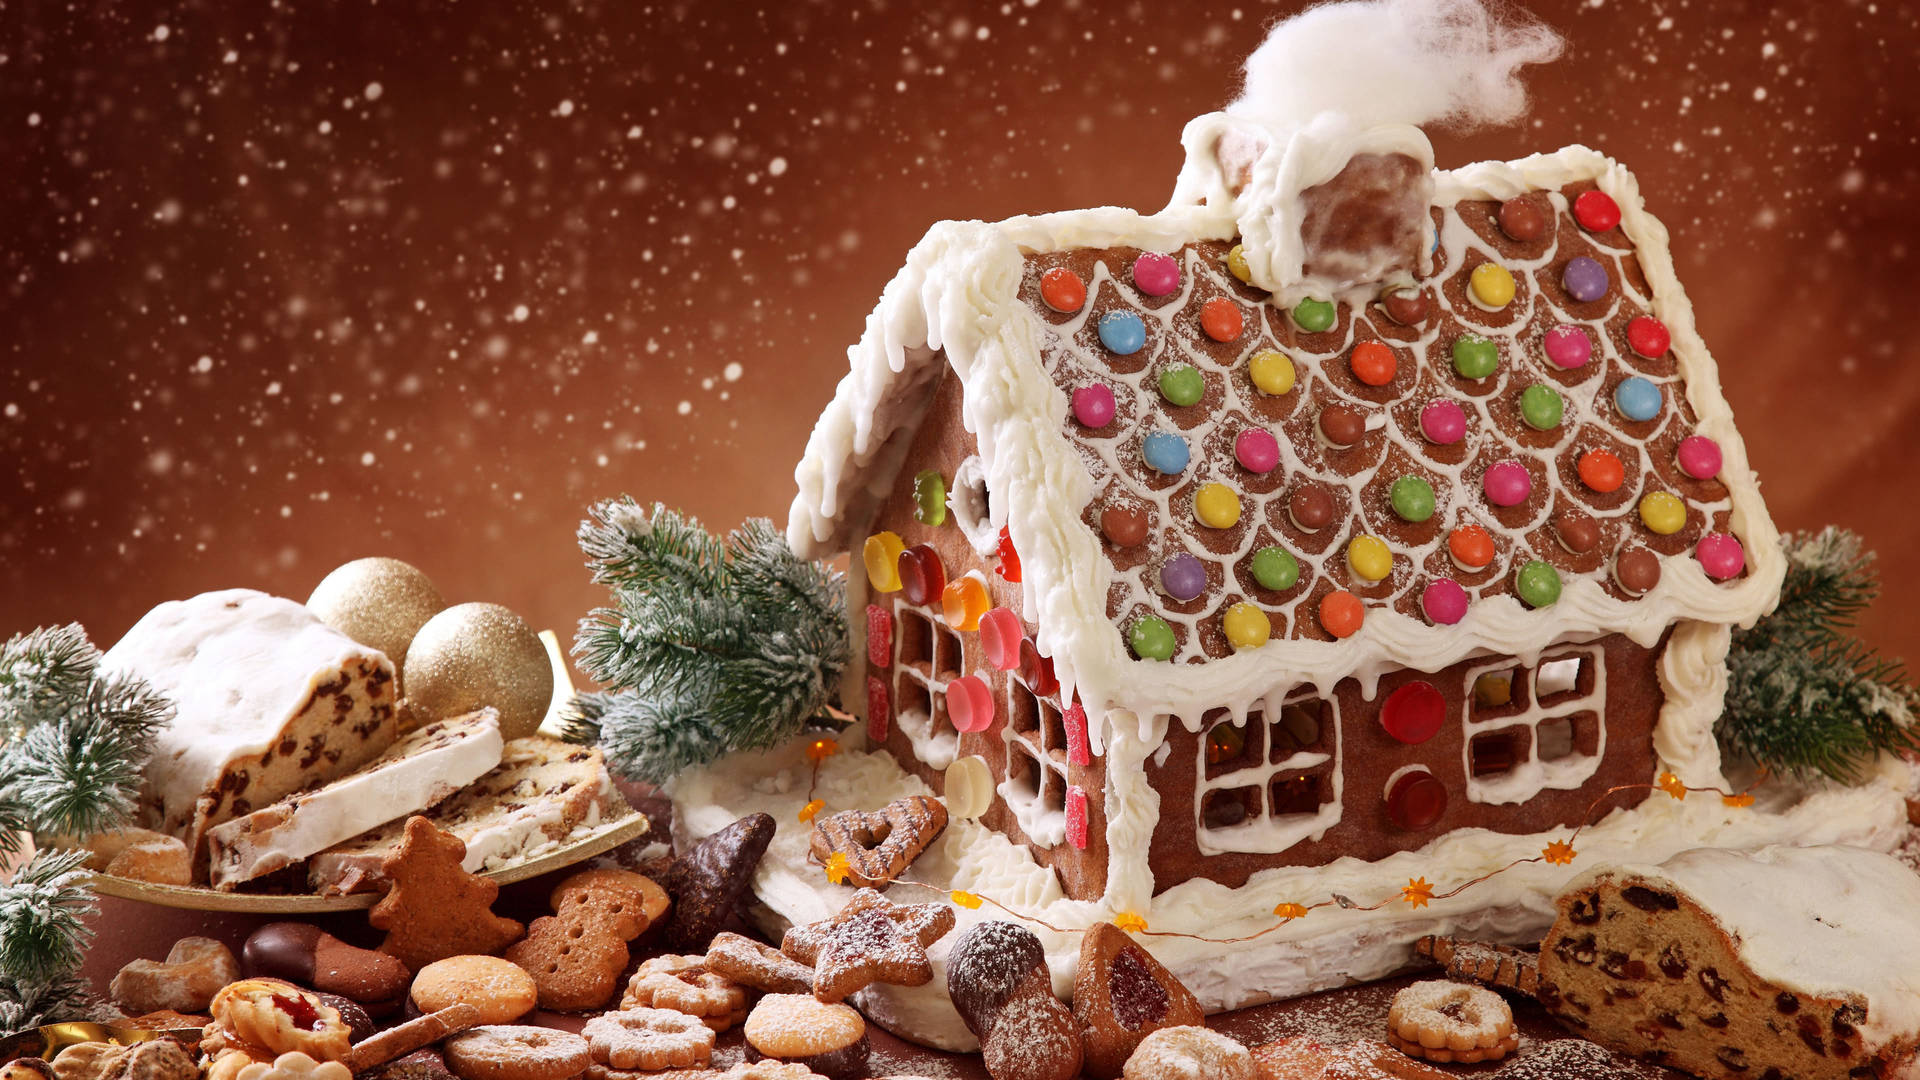 Delectable Gingerbread Chocolate House Wallpaper